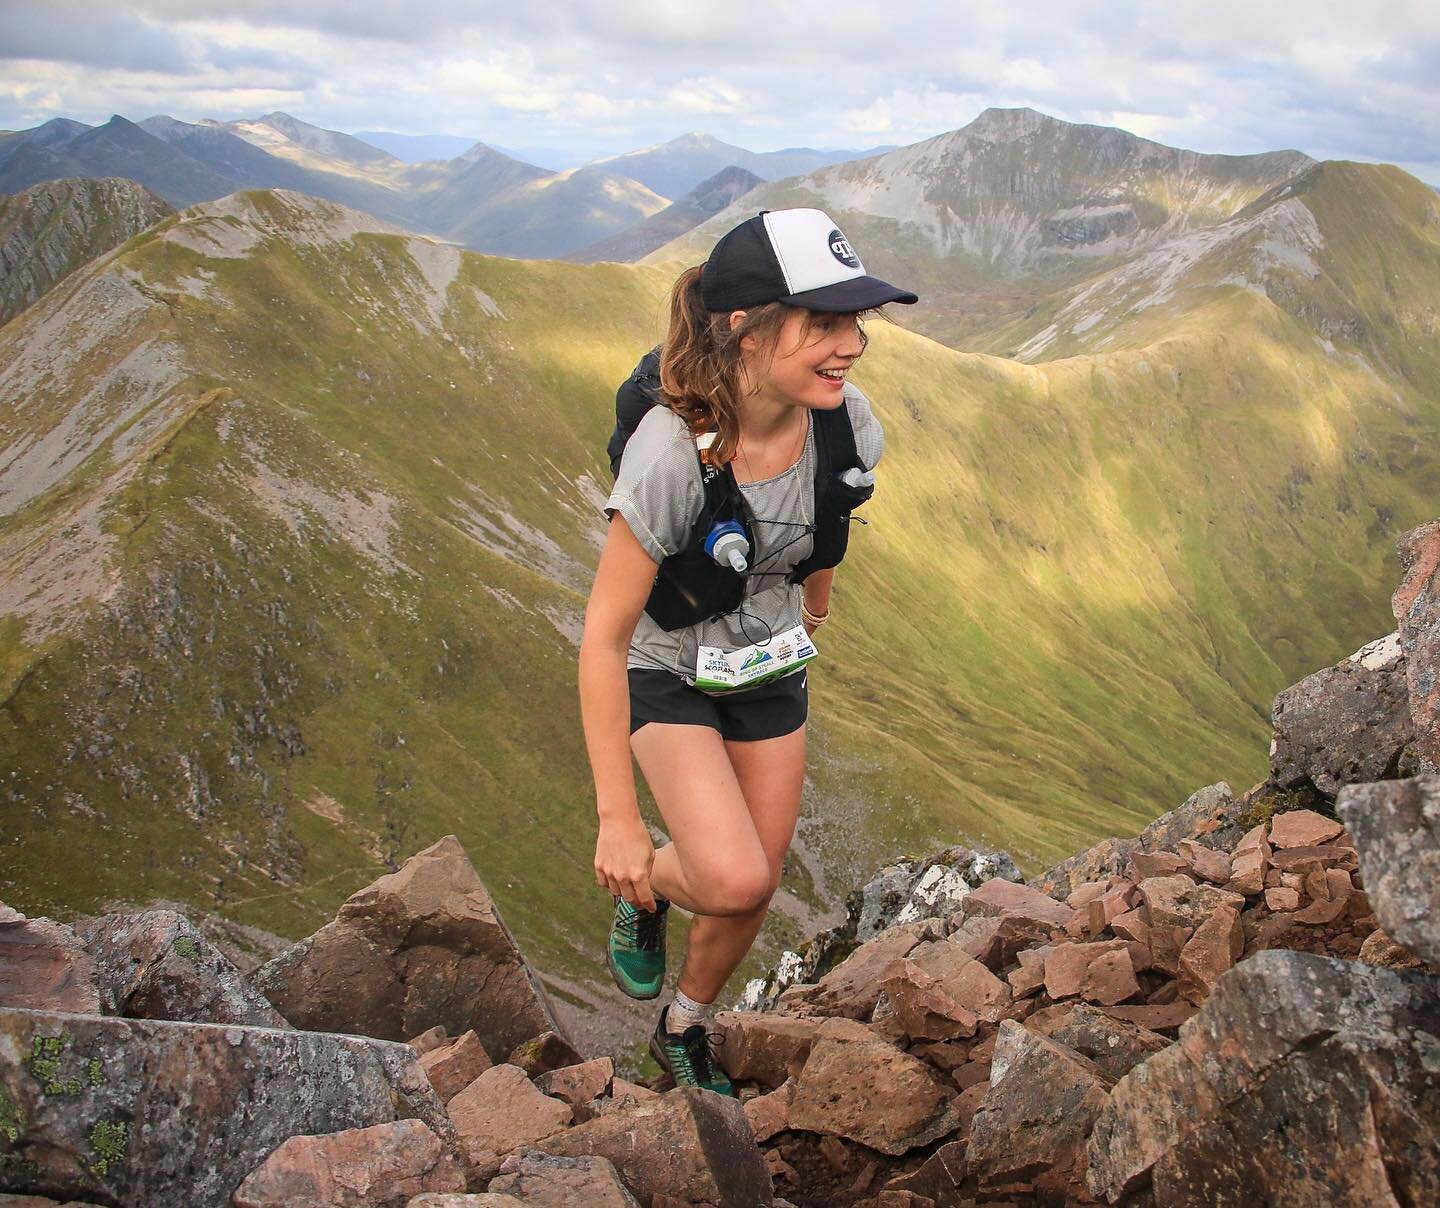 Ring of Steall Skyrace
What a weekend! I signed up for this race in the first lockdown - all the usual expeditions around the world I did had been cancelled and I needed a challenge to aim for. Since then I have become a lot more comfortable with not